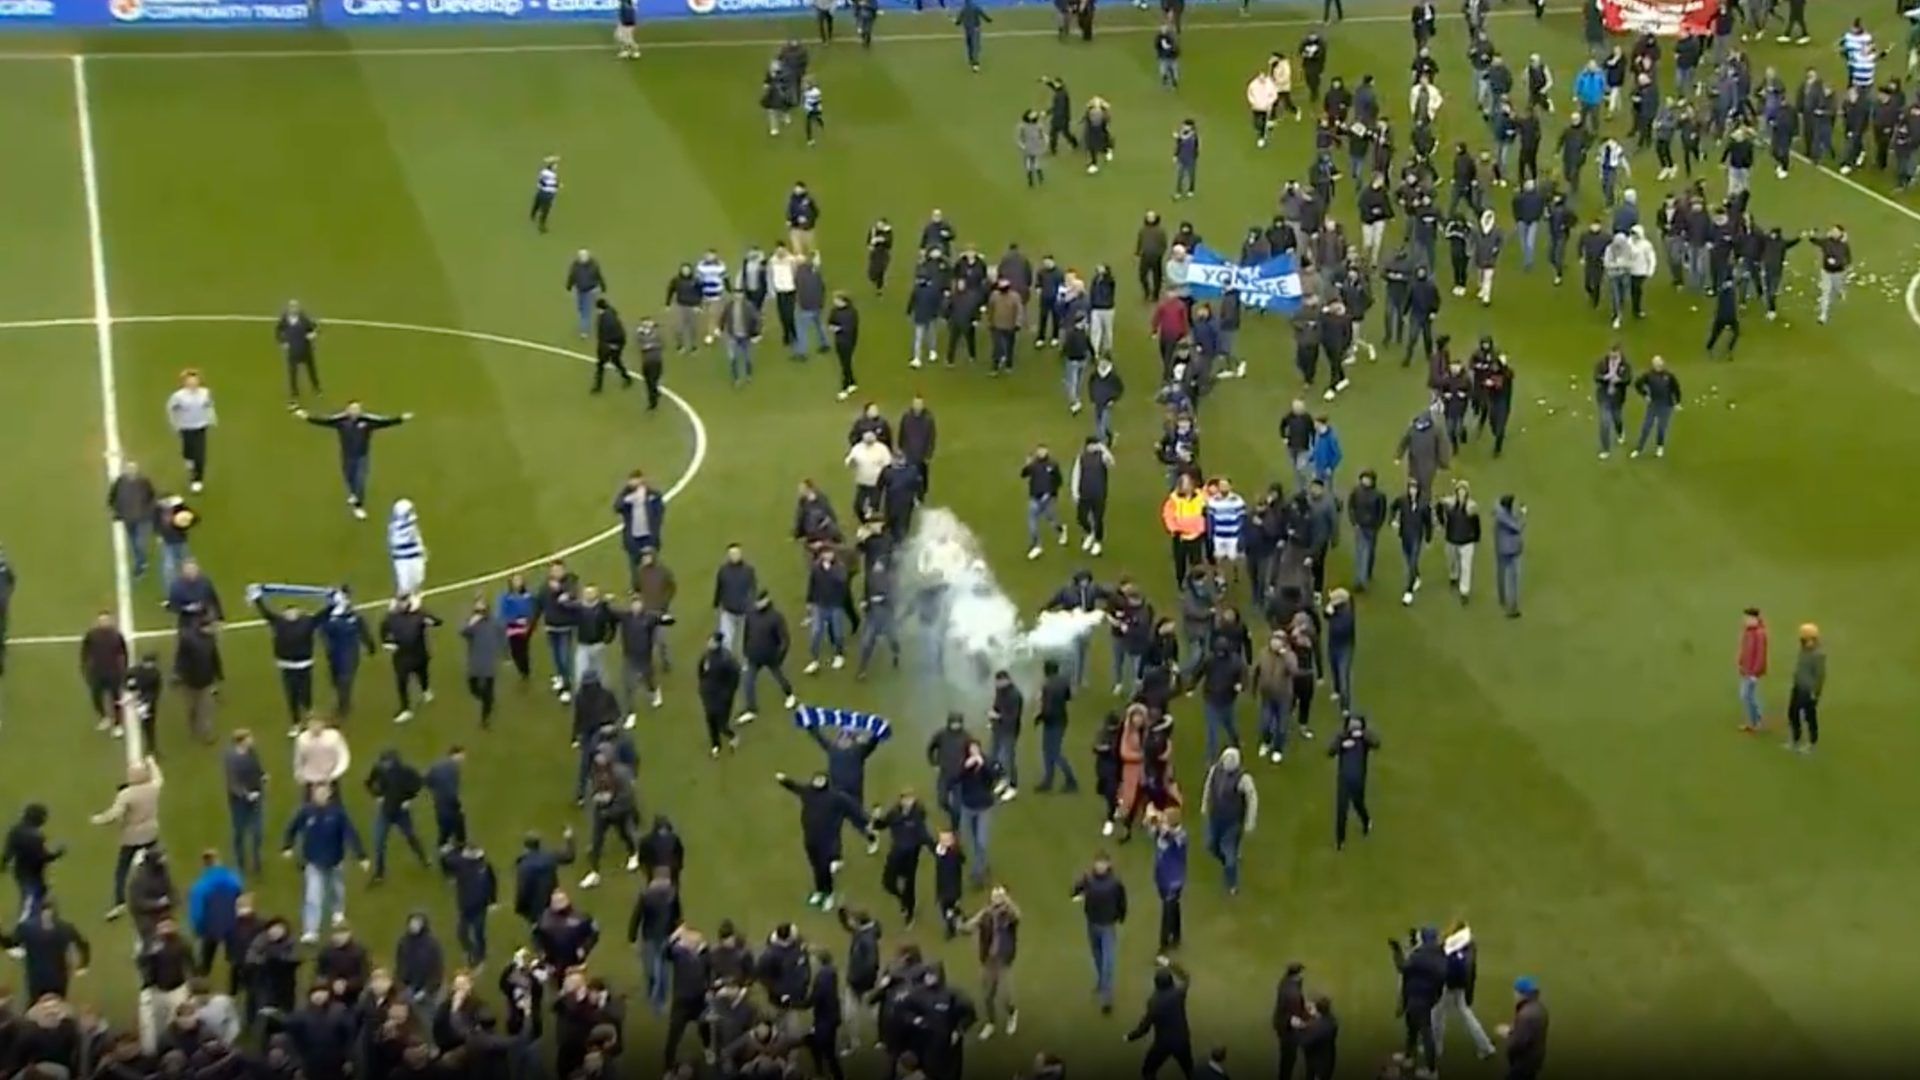 Reading match abandoned after pitch invasion protest against owner